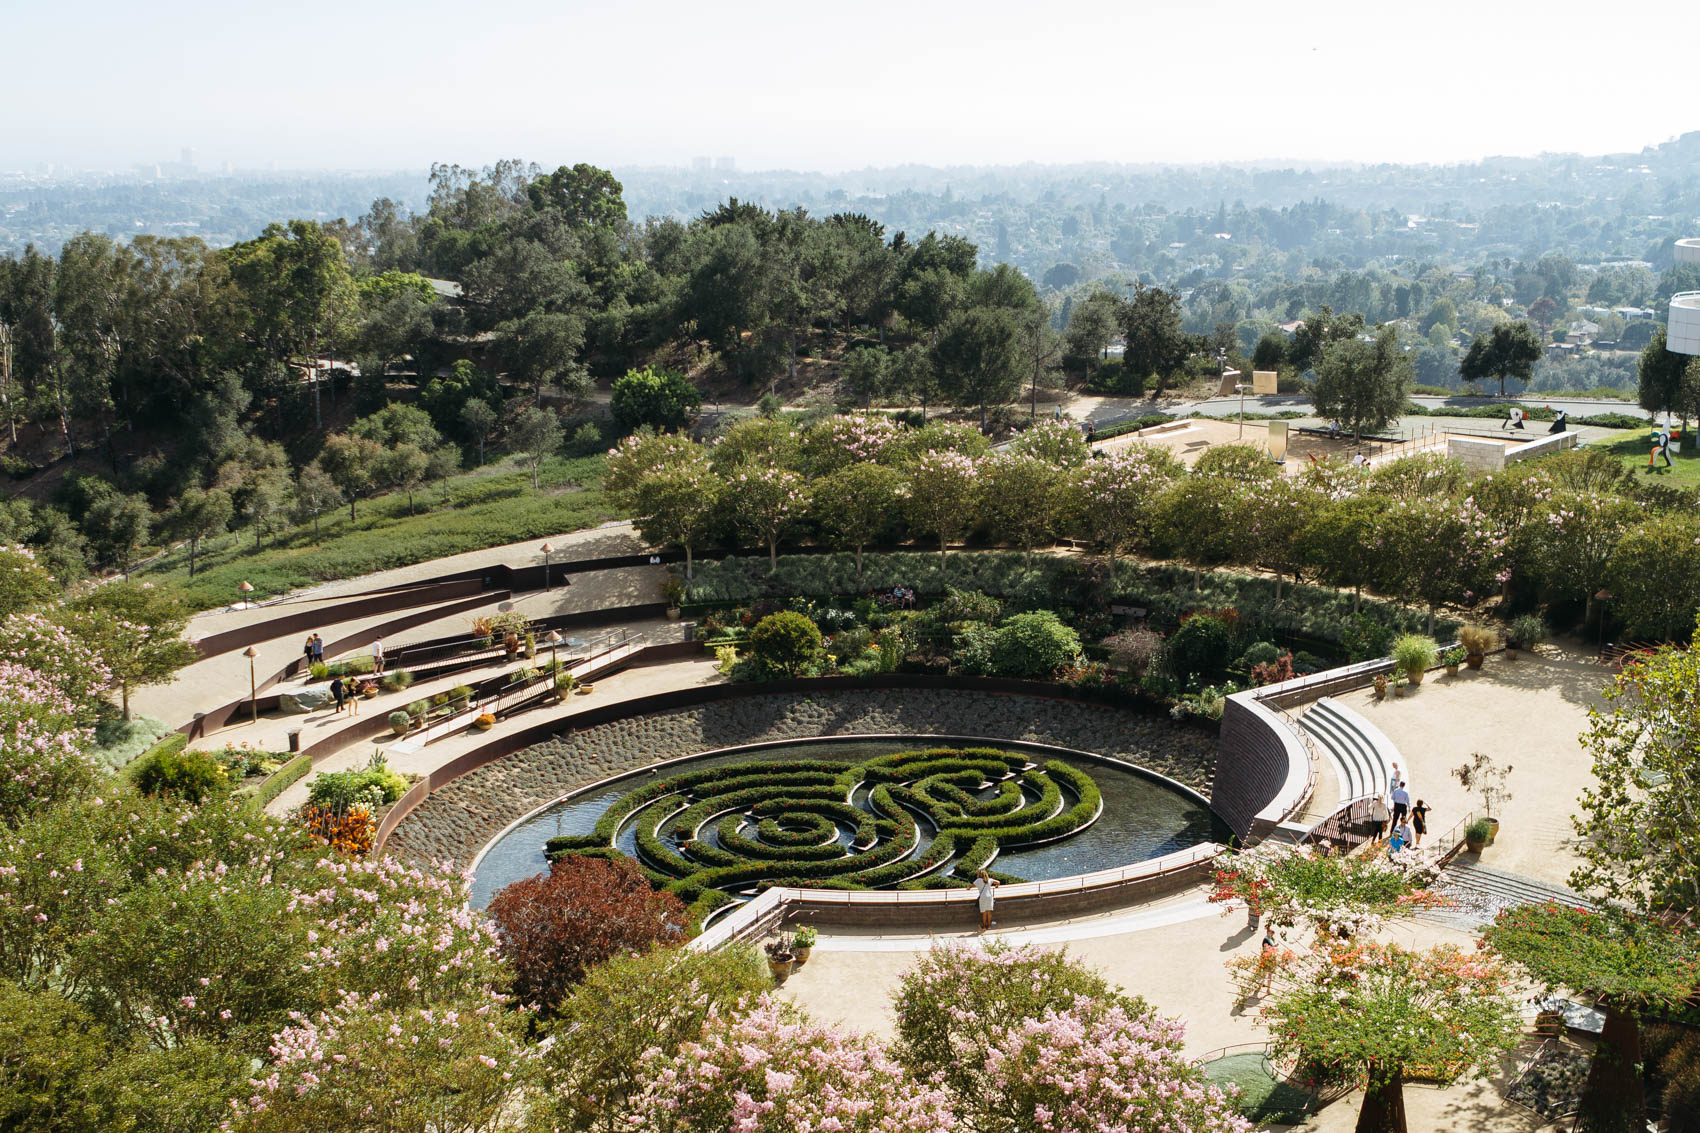 If you're travelling to Los Angeles, spend a day at the Getty Center and explore the art and the gardens